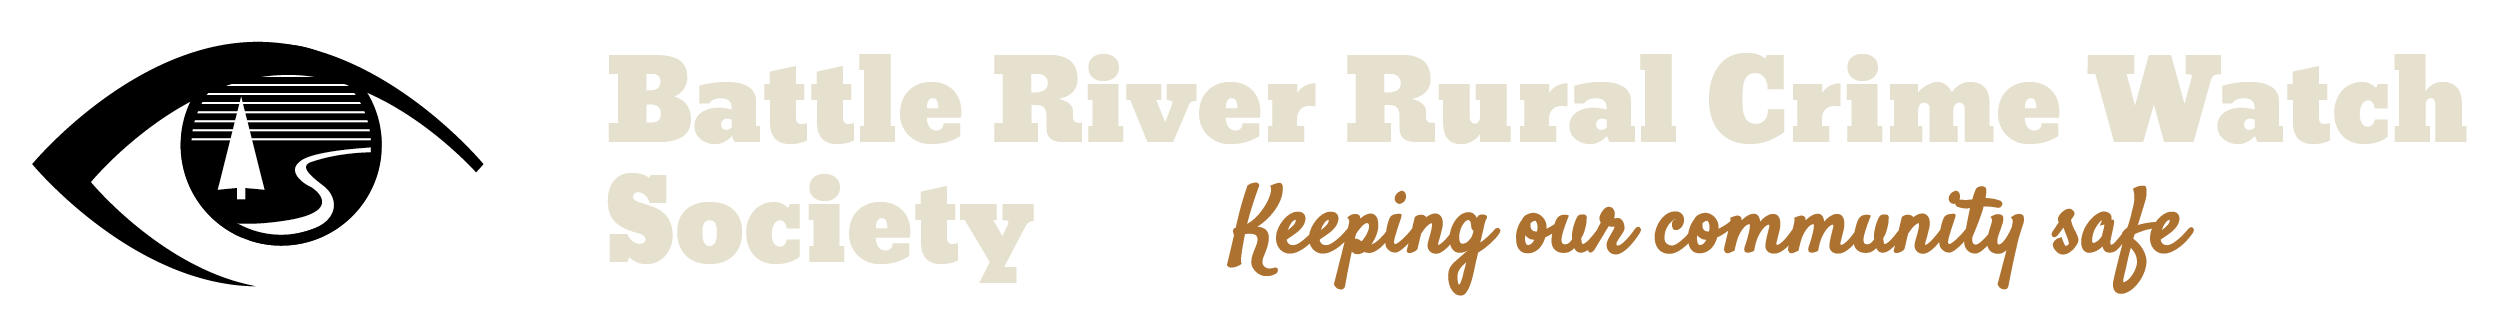 Battle River Rural Crime Watch Society